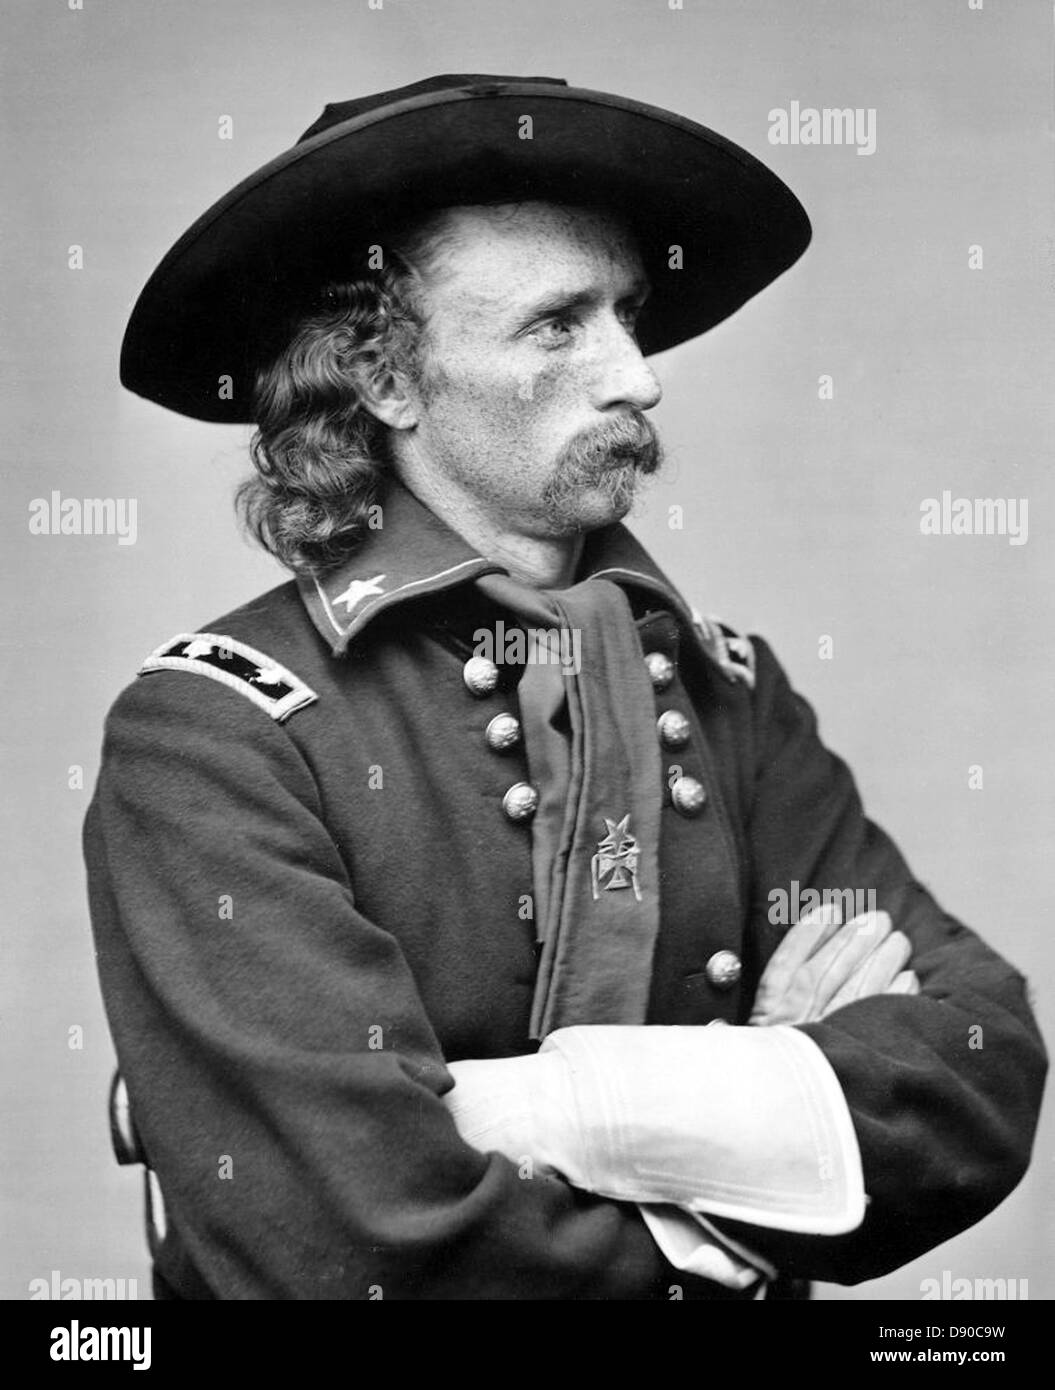 GEORGE ARMSTRONG CUSTER (1839-1876) United States Army officer as a brevet-major about 1865 Stock Photo